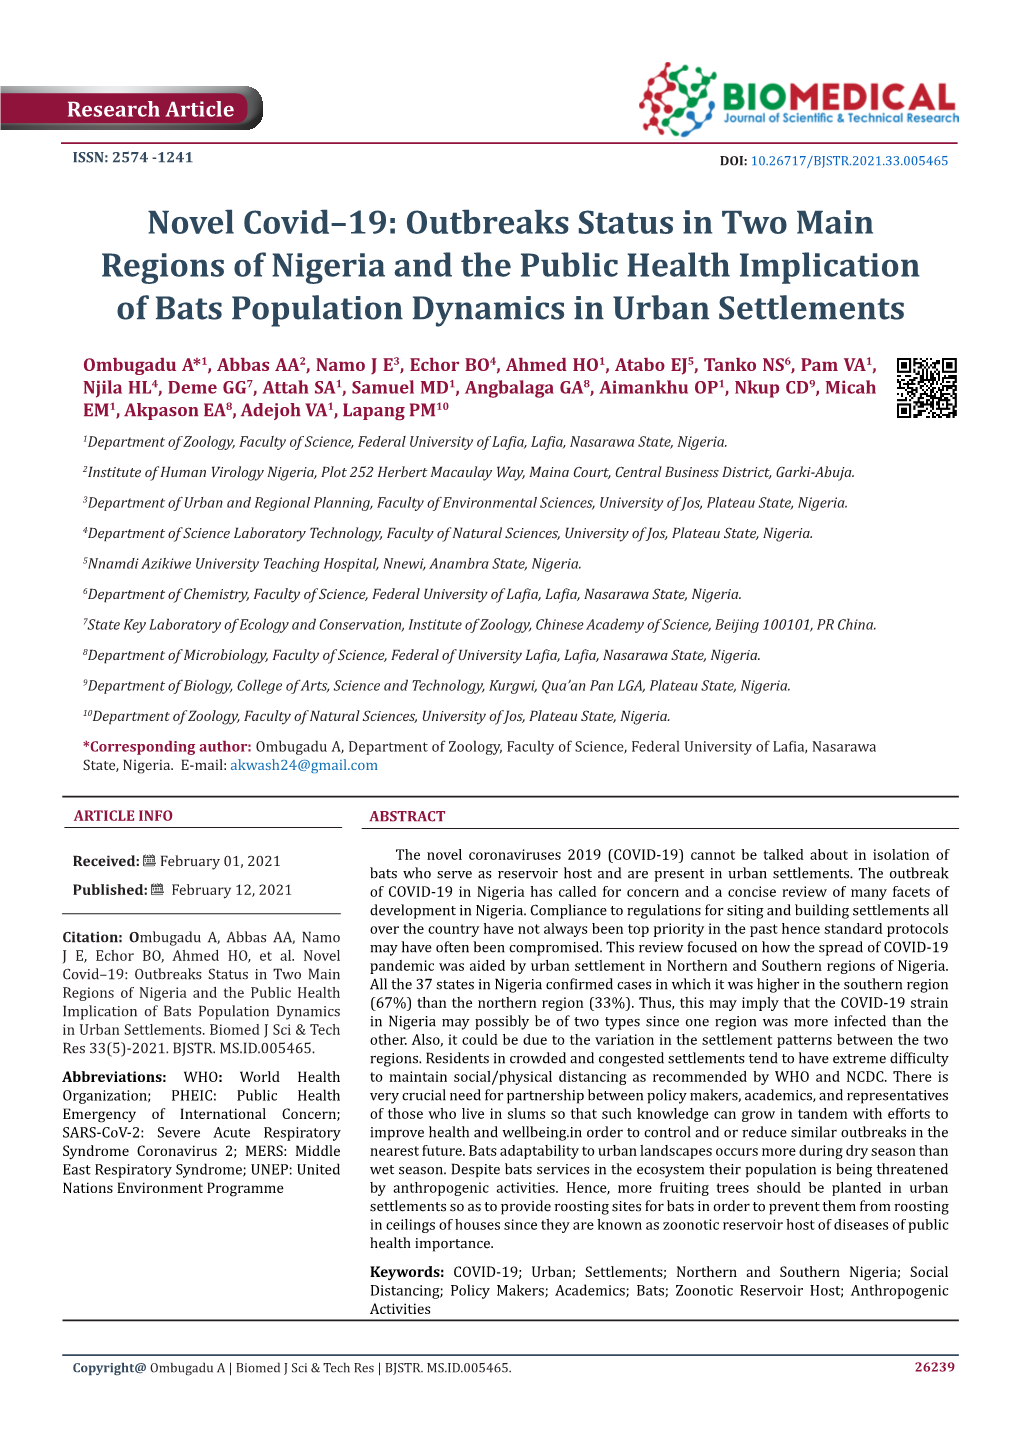 Novel Covid–19: Outbreaks Status in Two Main Regions of Nigeria and the Public Health Implication of Bats Population Dynamics in Urban Settlements